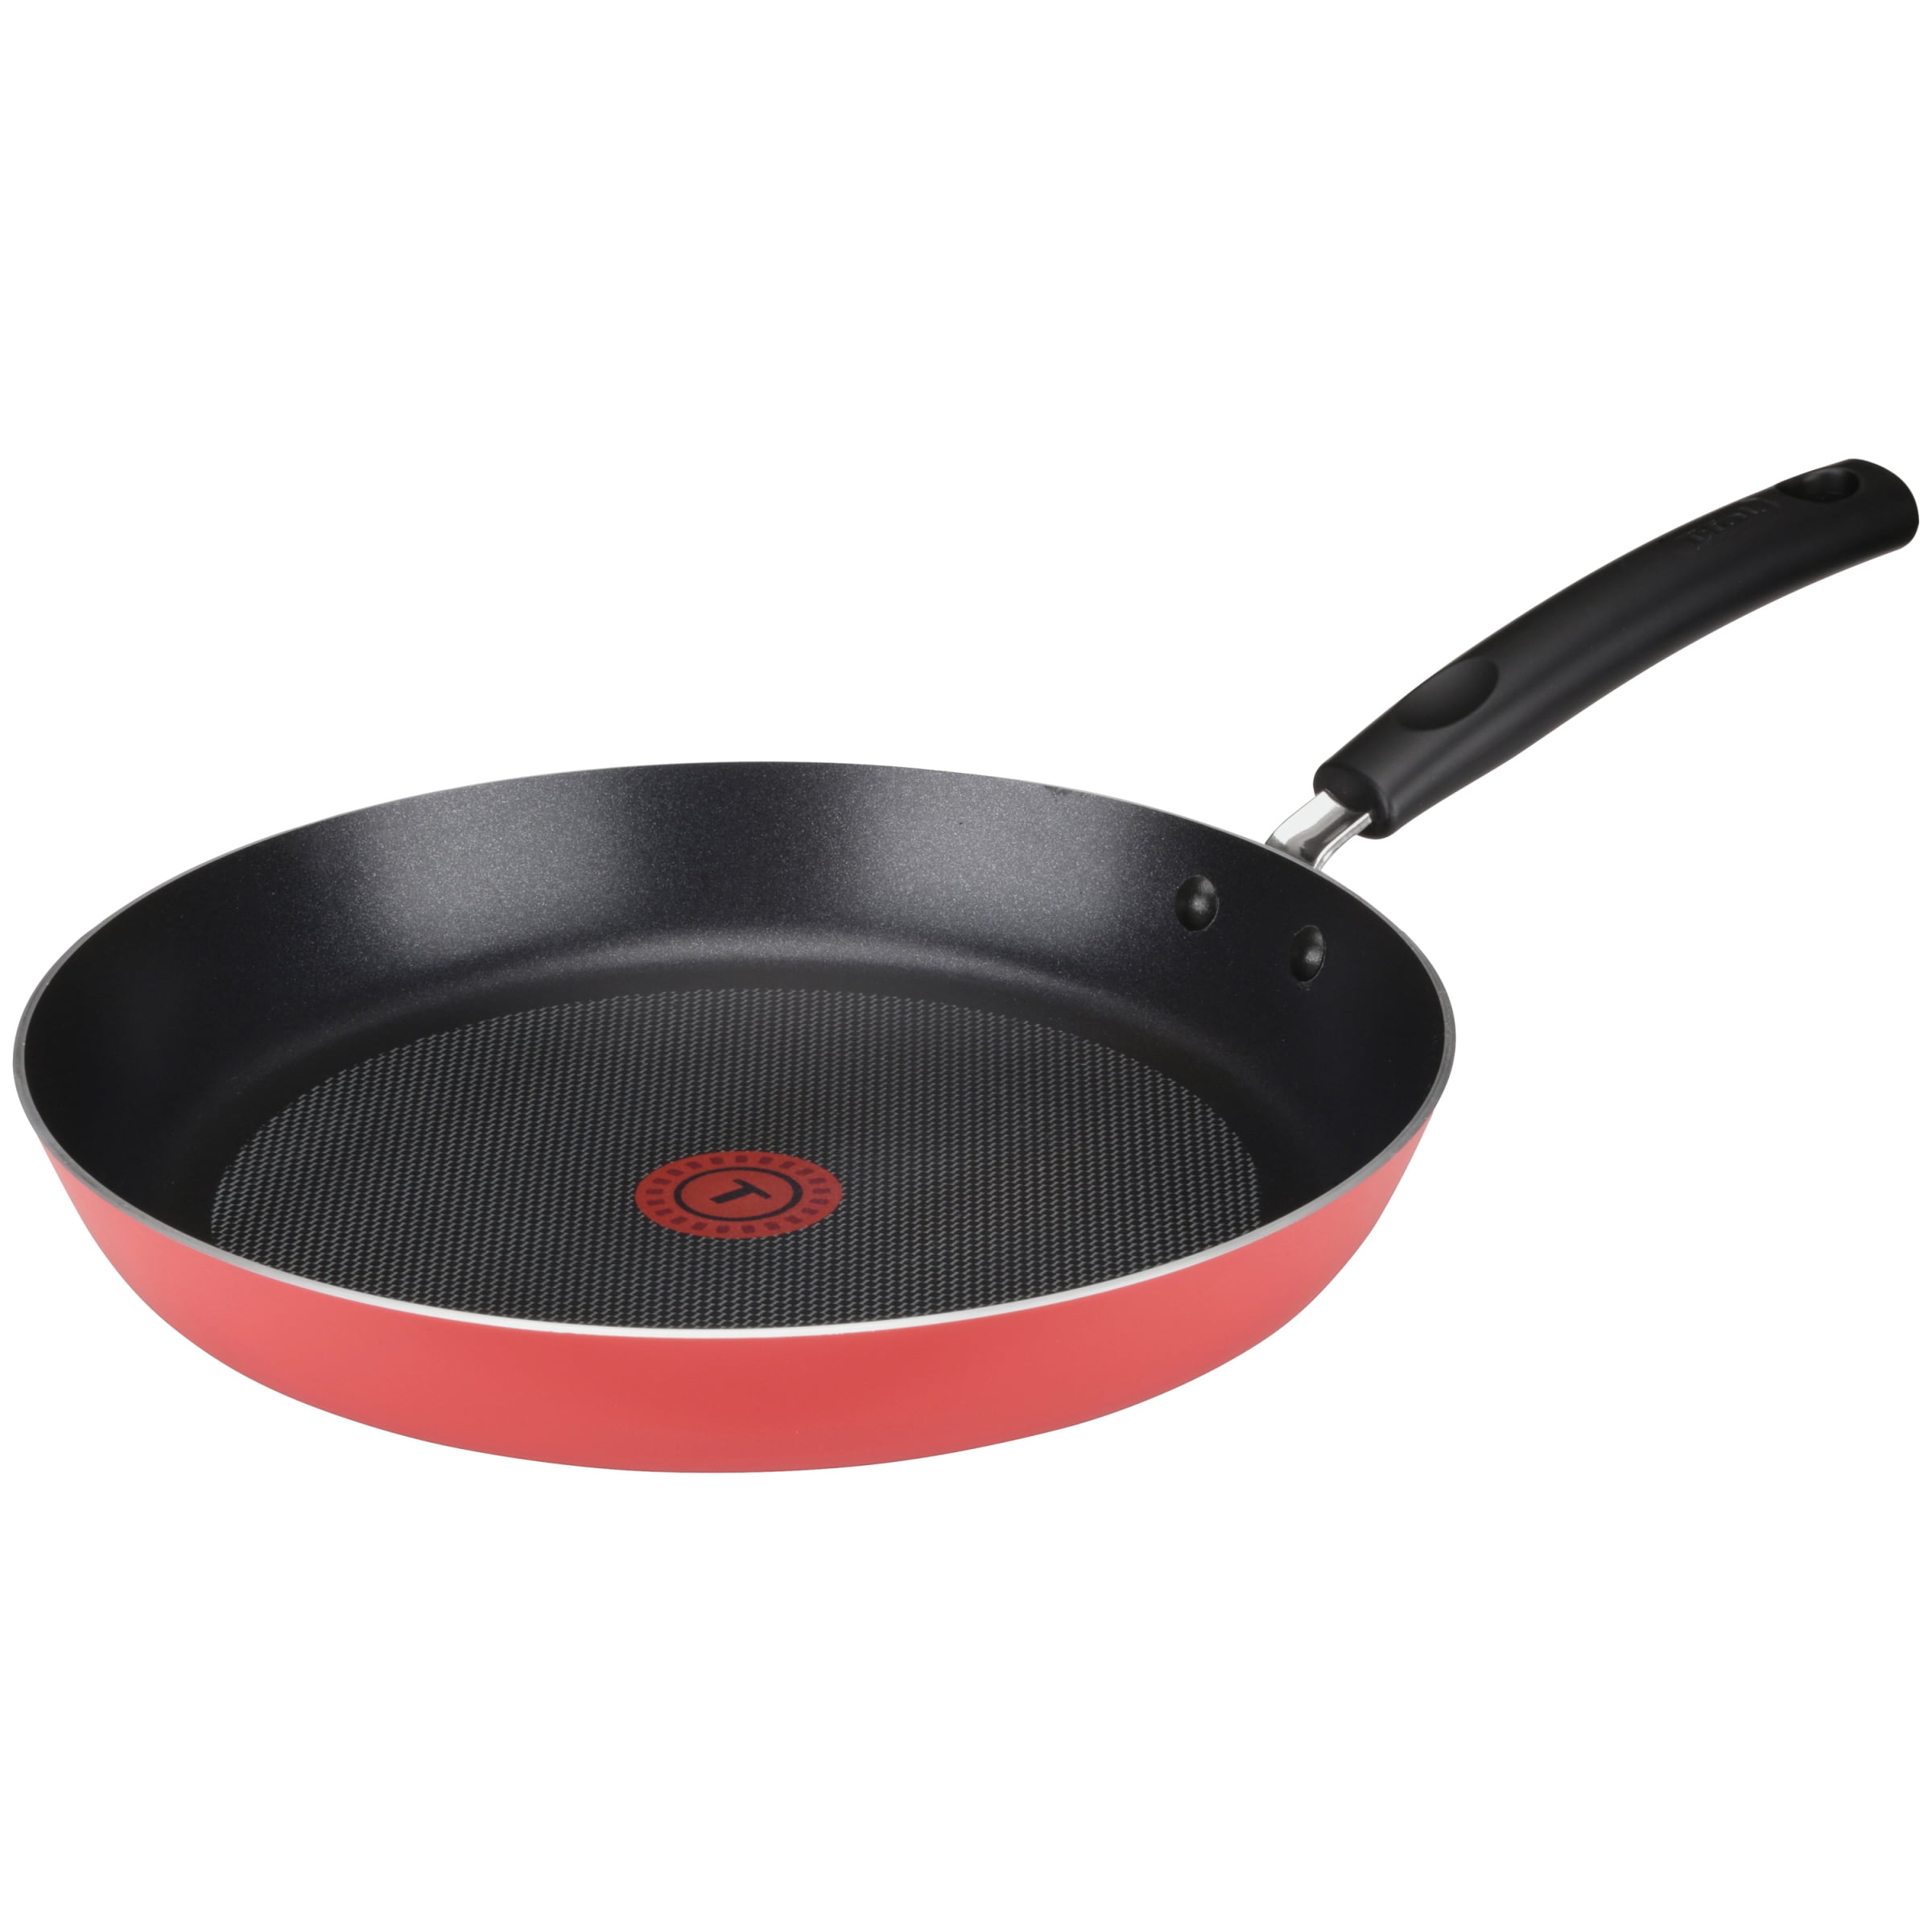 T-Fal 12 Round Griddle Pan Comal READ PIC WHAT U SEE GET